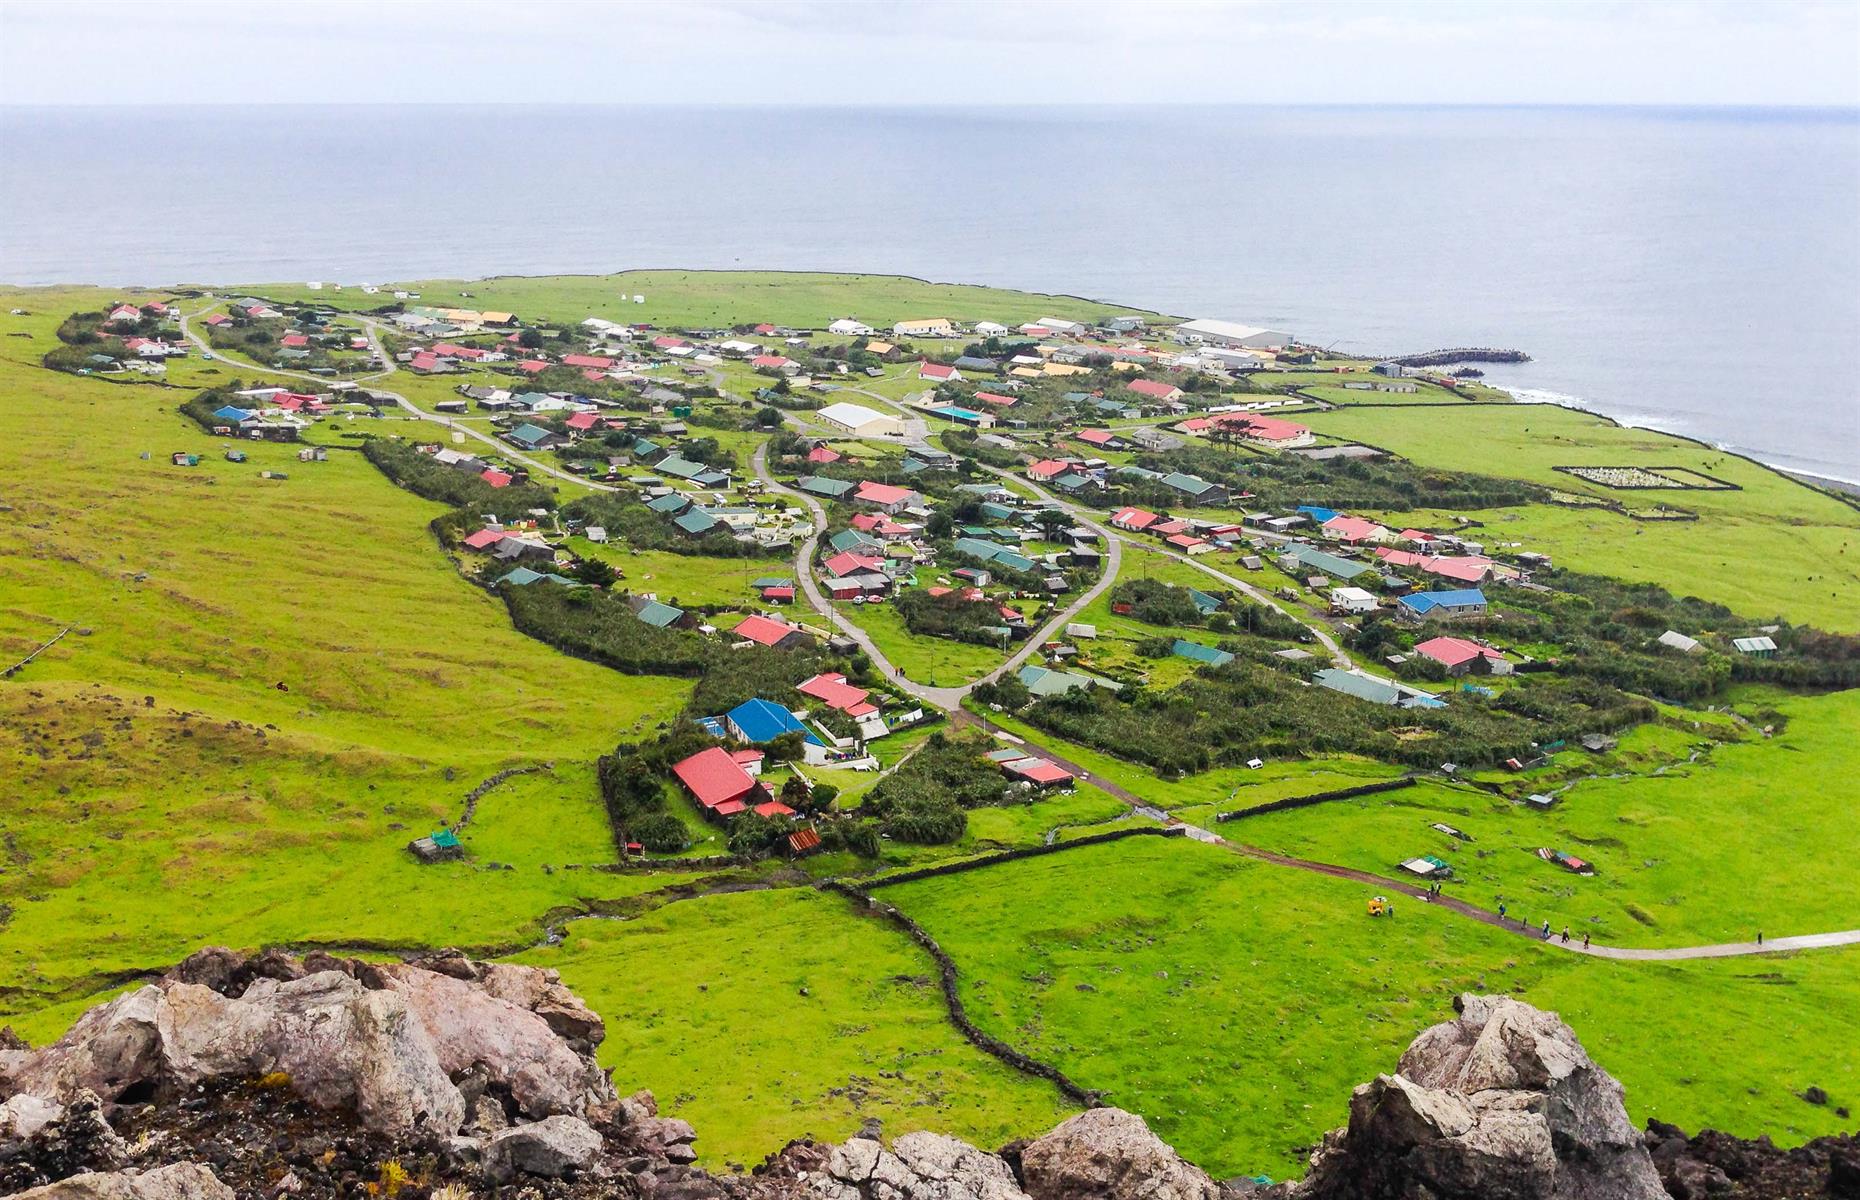 <p>The world's most remote populated island, Tristan da Cunha sits in the middle of the Atlantic Ocean. 1,750 miles from Cape Town, Edinburgh of the Seven Seas, the only settlement on the island, is home to around <a href="https://www.tristandc.com/population.php">234</a> permanent residents.</p>